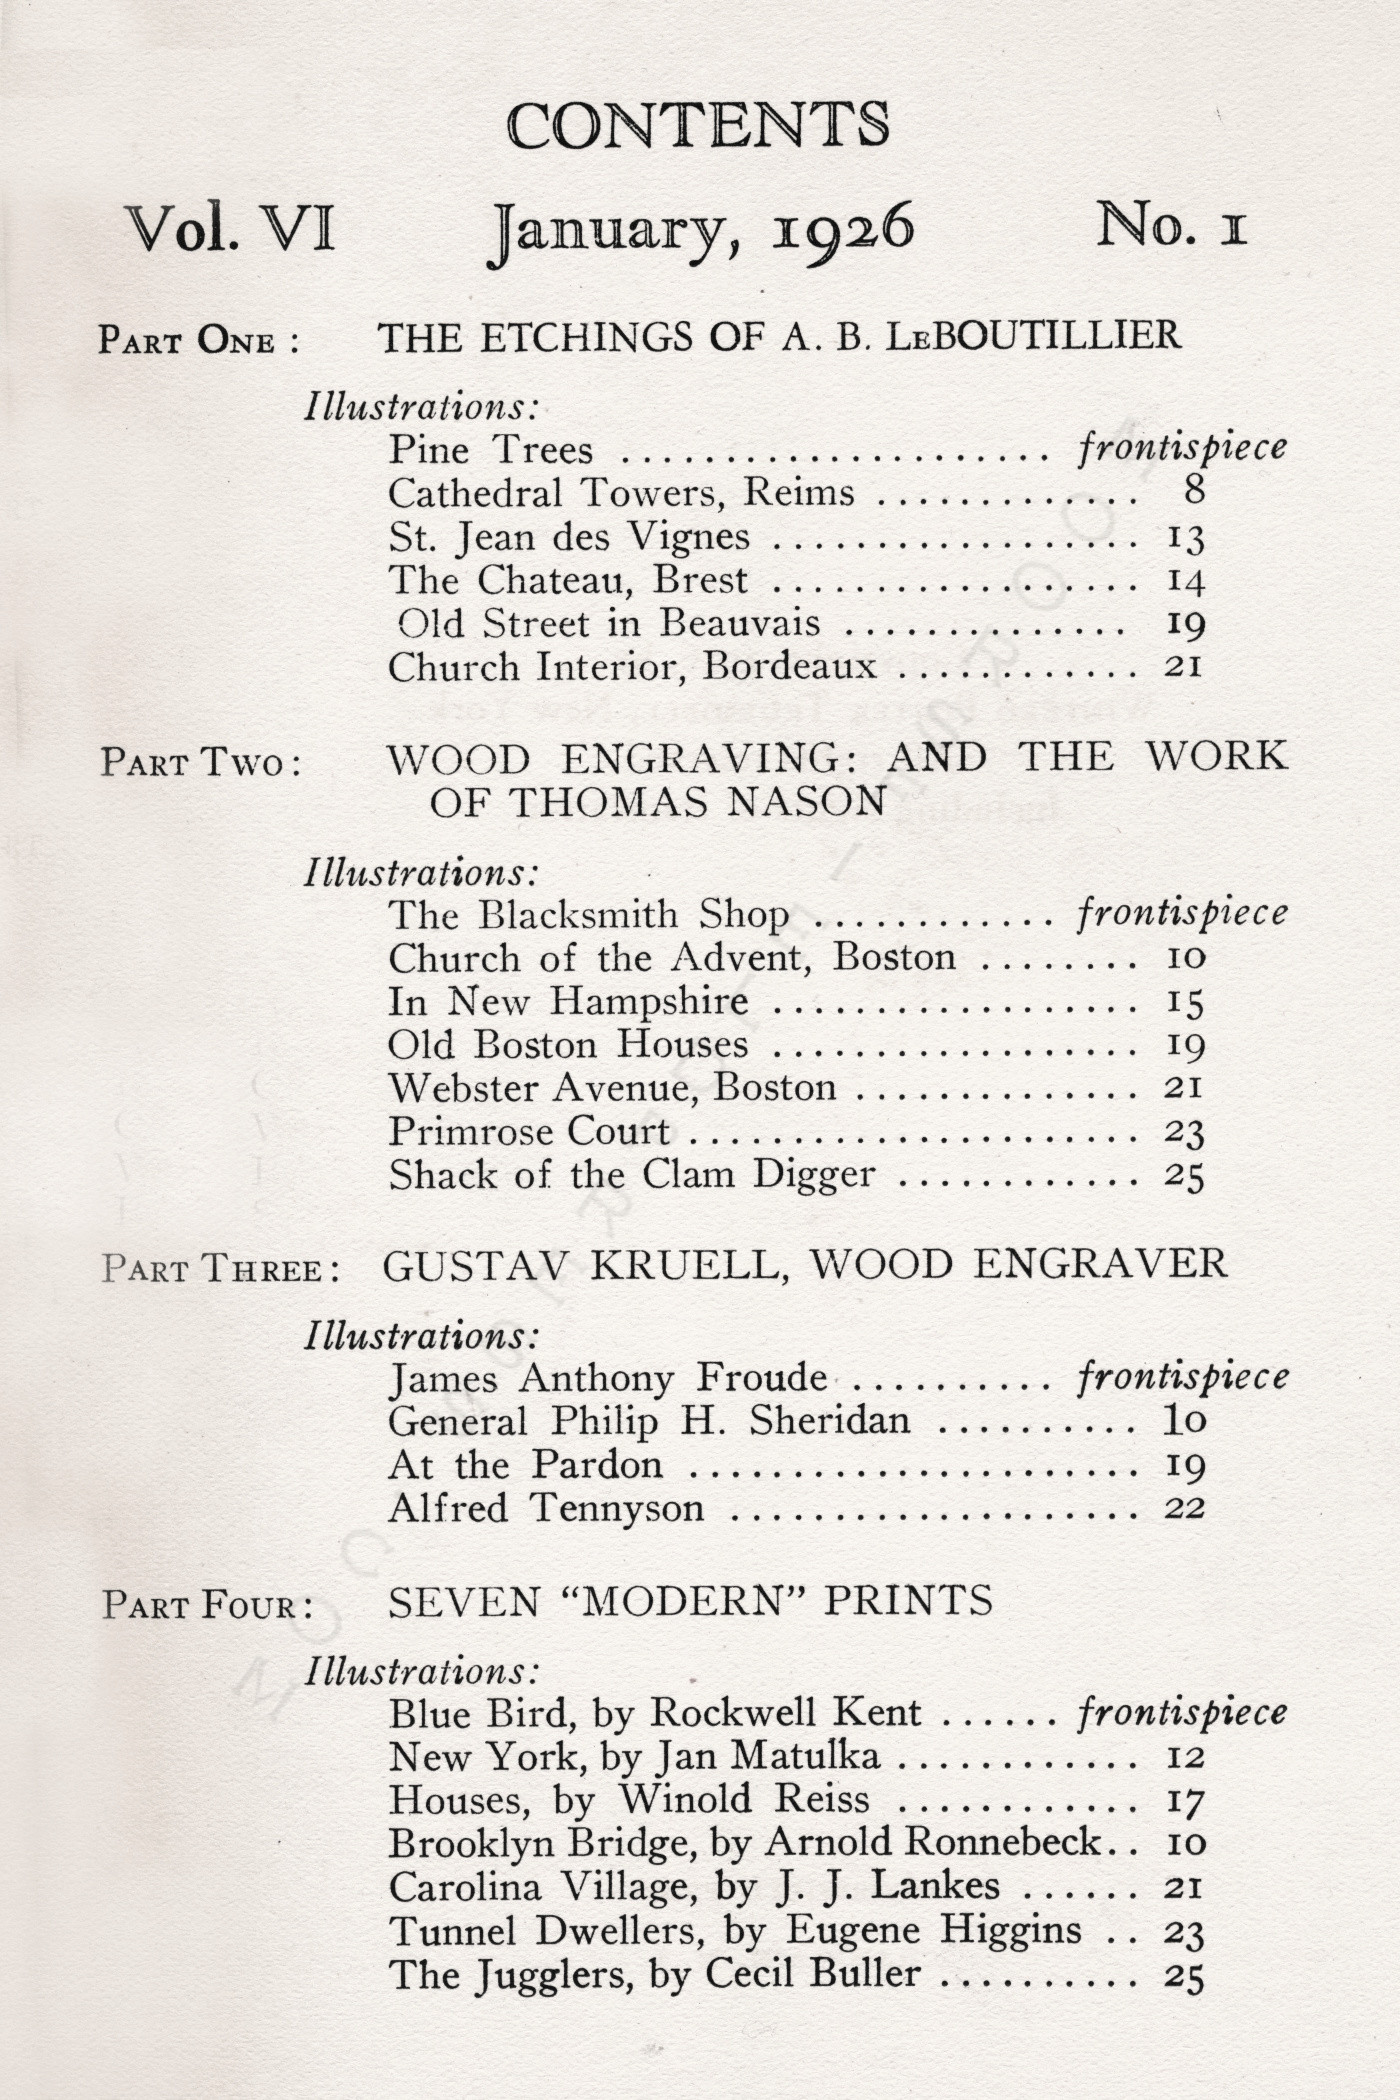 The
                          Print Connoisseur by Winfred Porter Truesdell
                          printed by the Moorsfield Press-January 1926